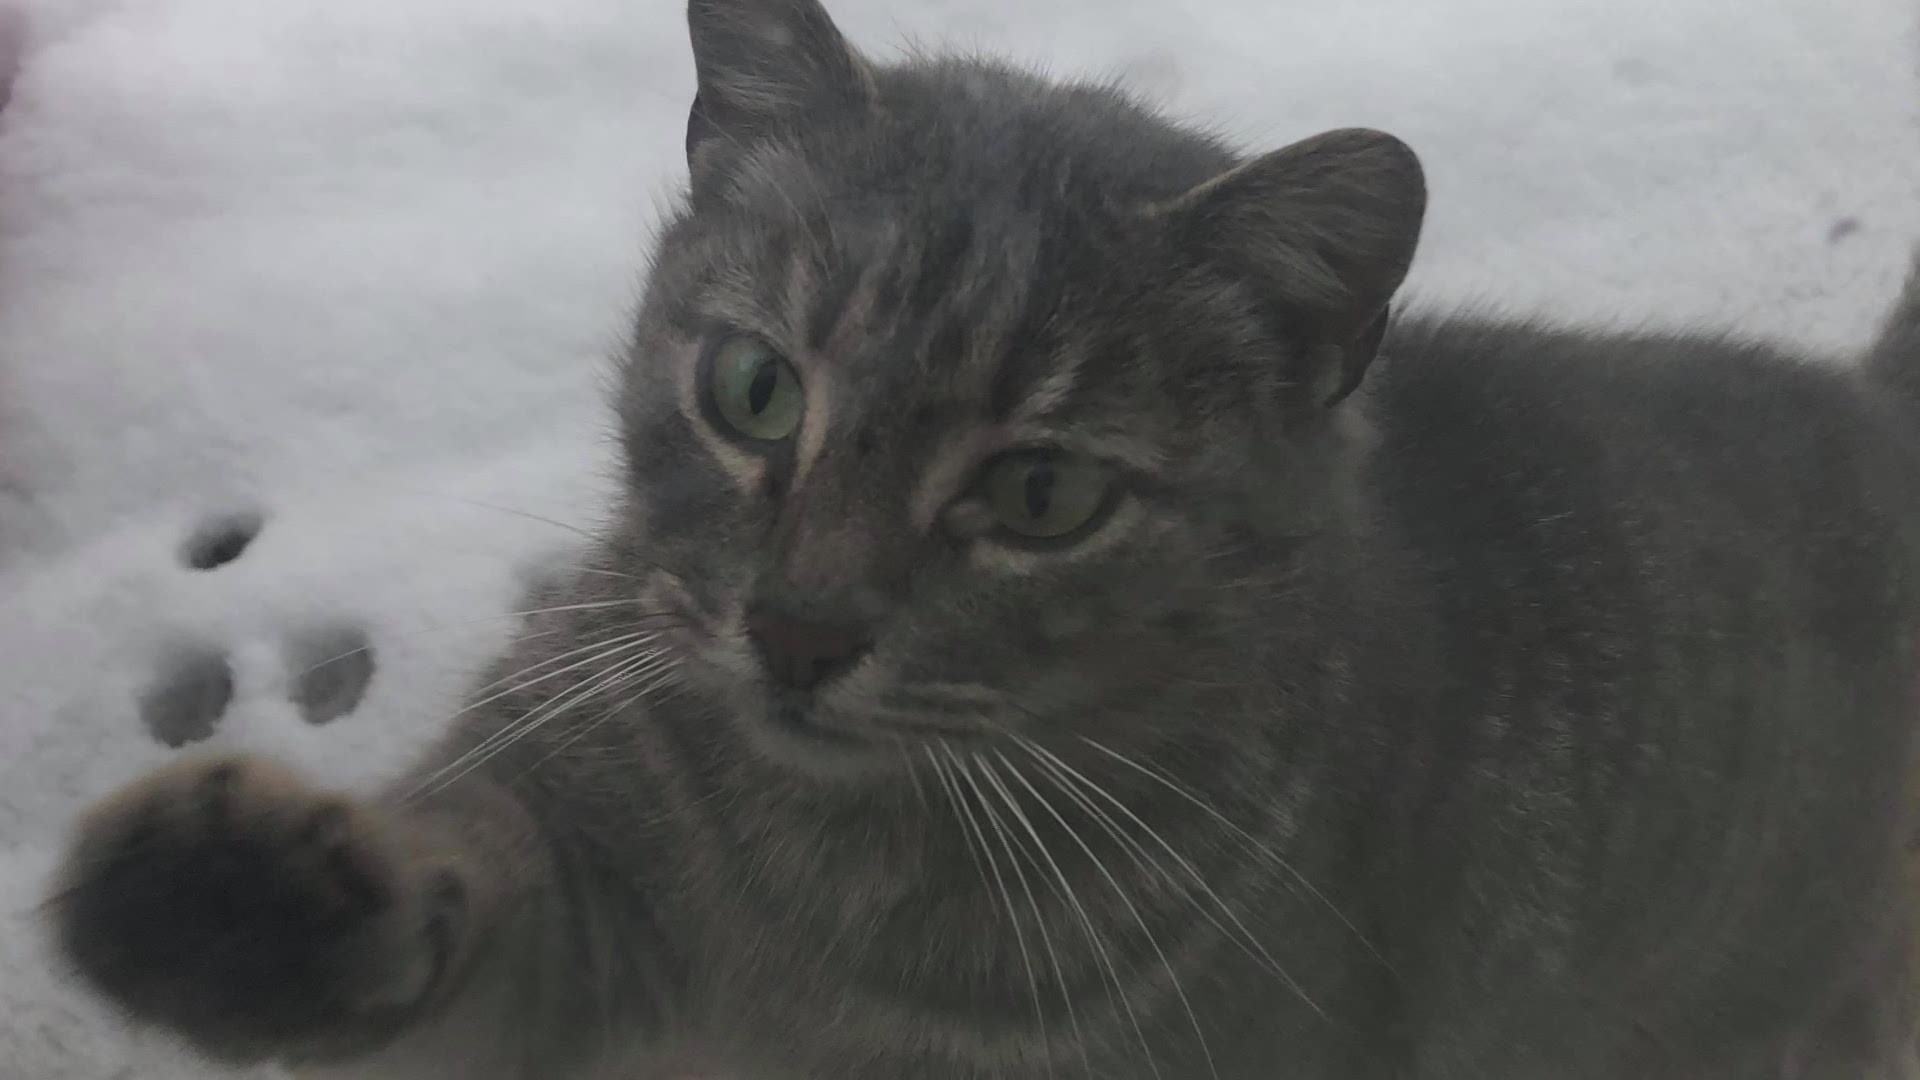 Olive the cat escaped during the Midland floods last spring. She was reunited with her owner on Jan. 4, with help from the 'Midland Floods' - Jeremy & Ashley Flood.